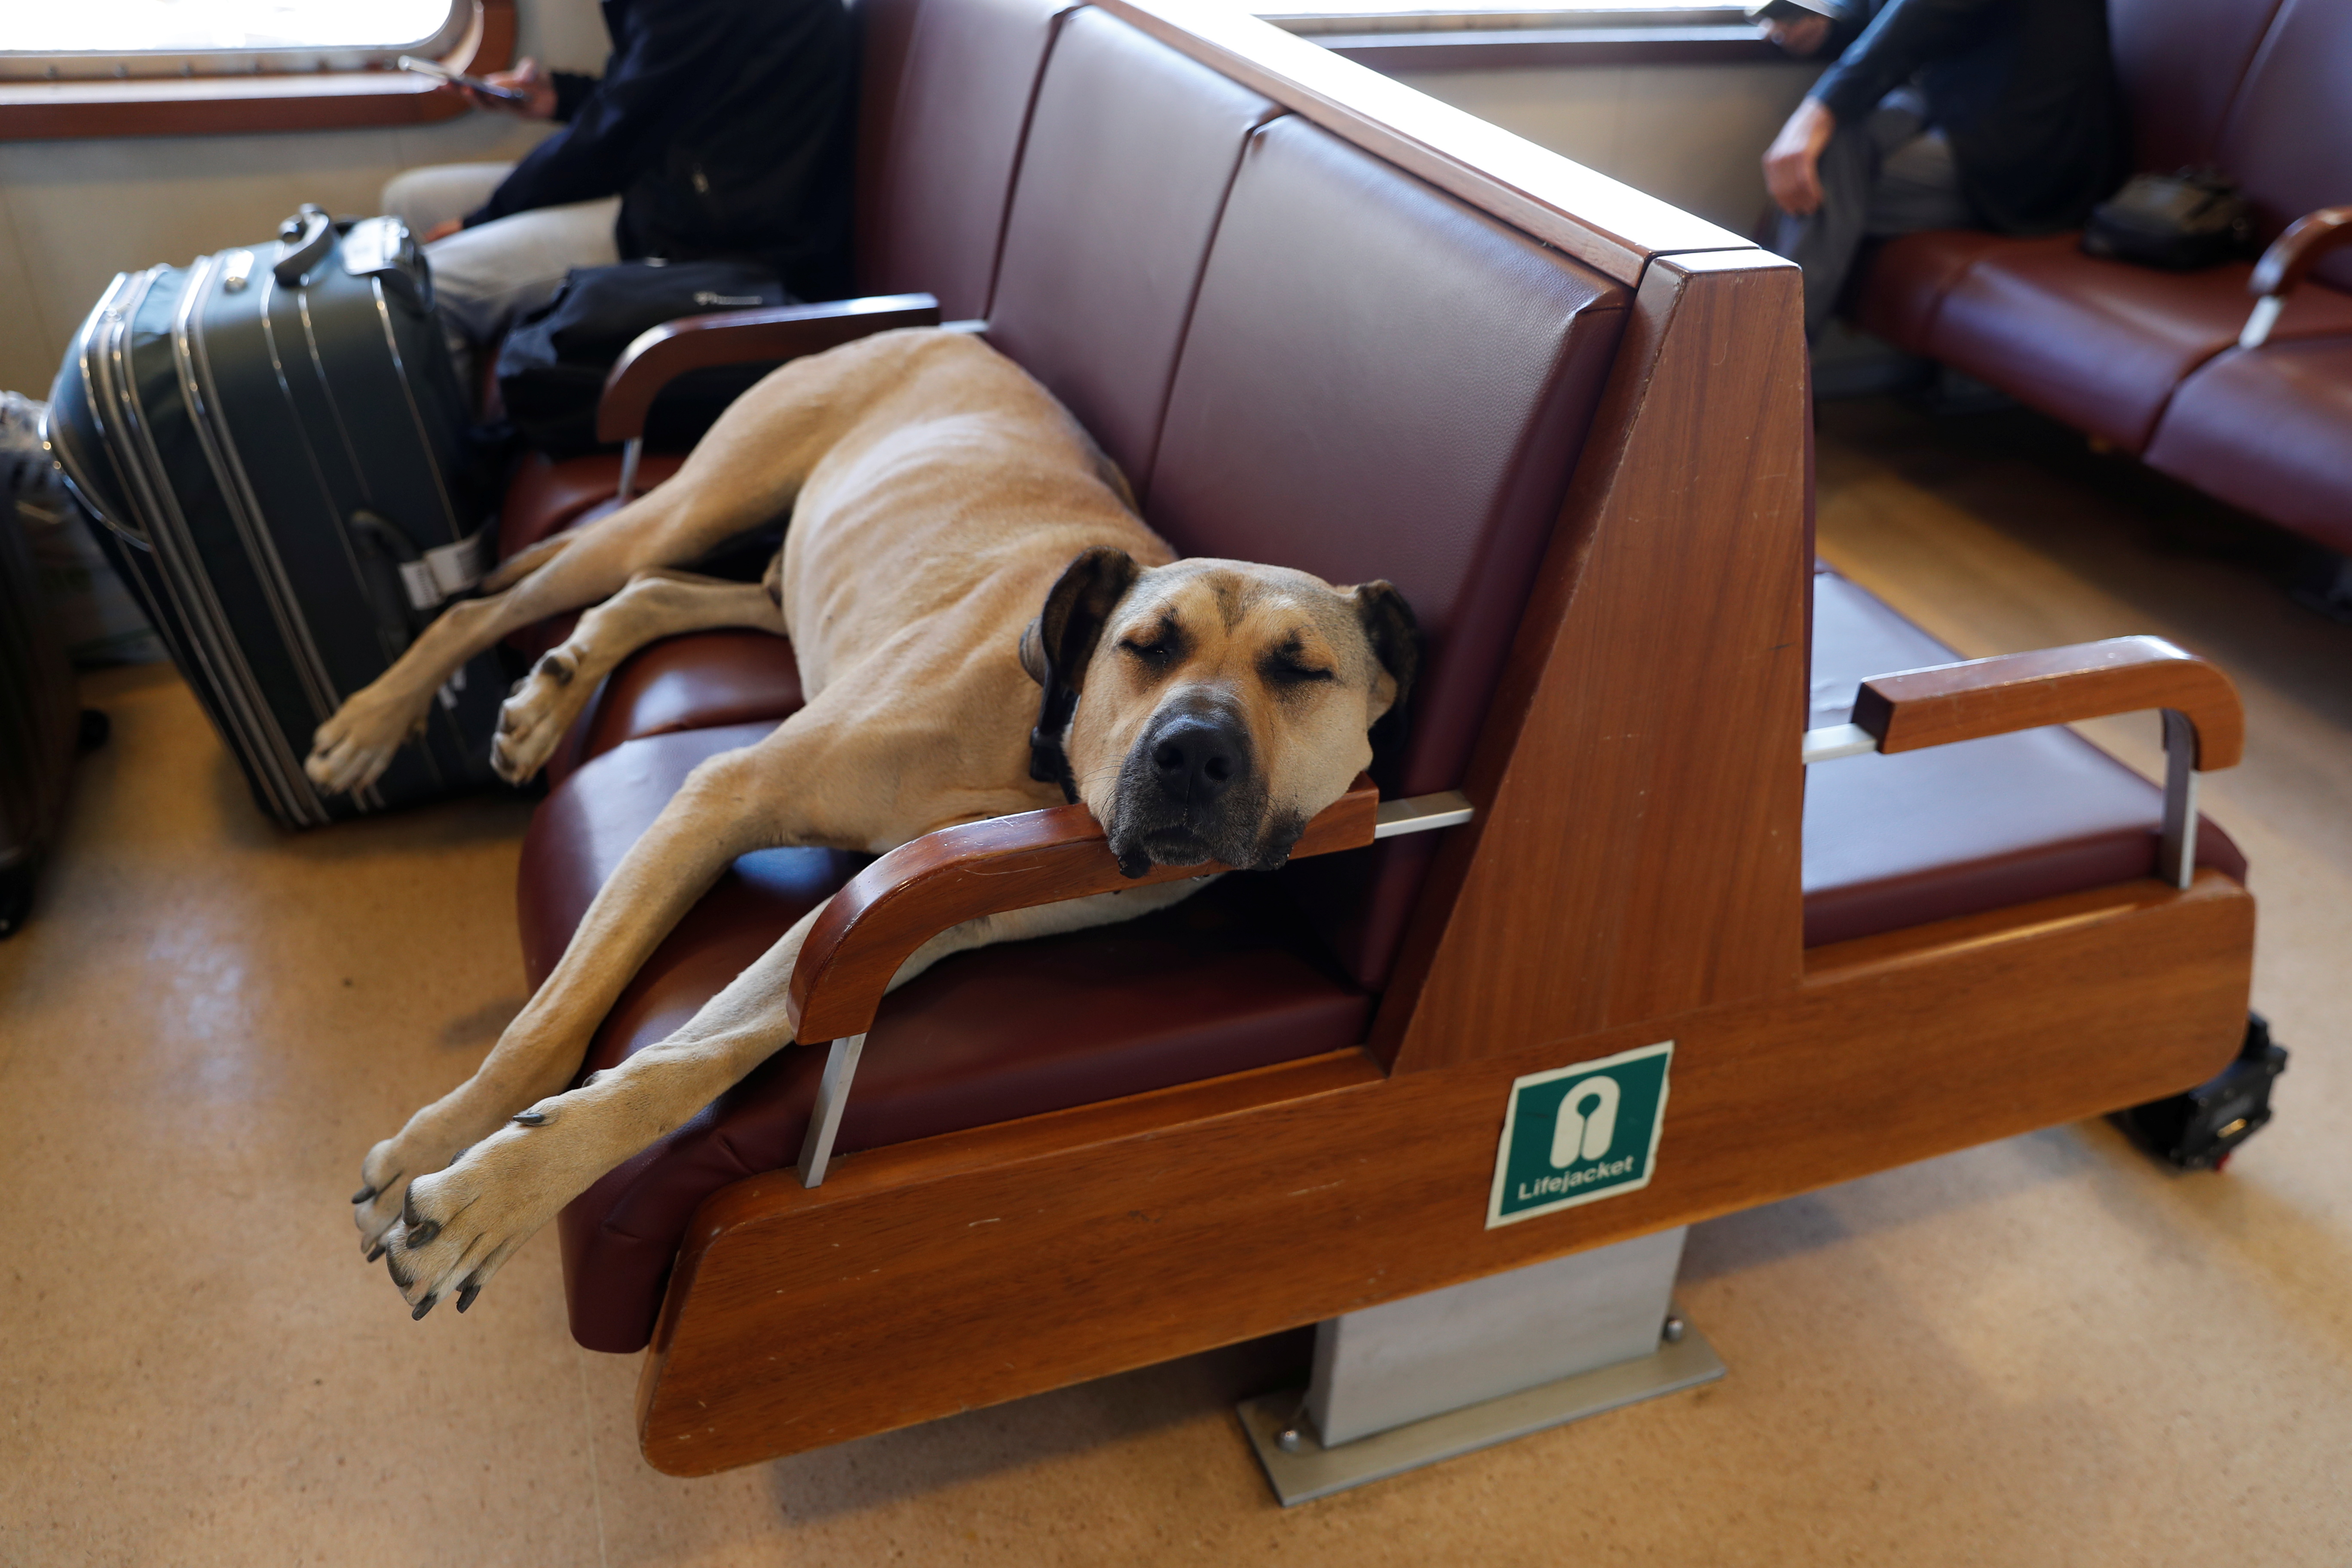 Street dog Boji, a regular user of commuter ferries, buses, metro trains, and trams, sleeps on a ferry in Istanbul